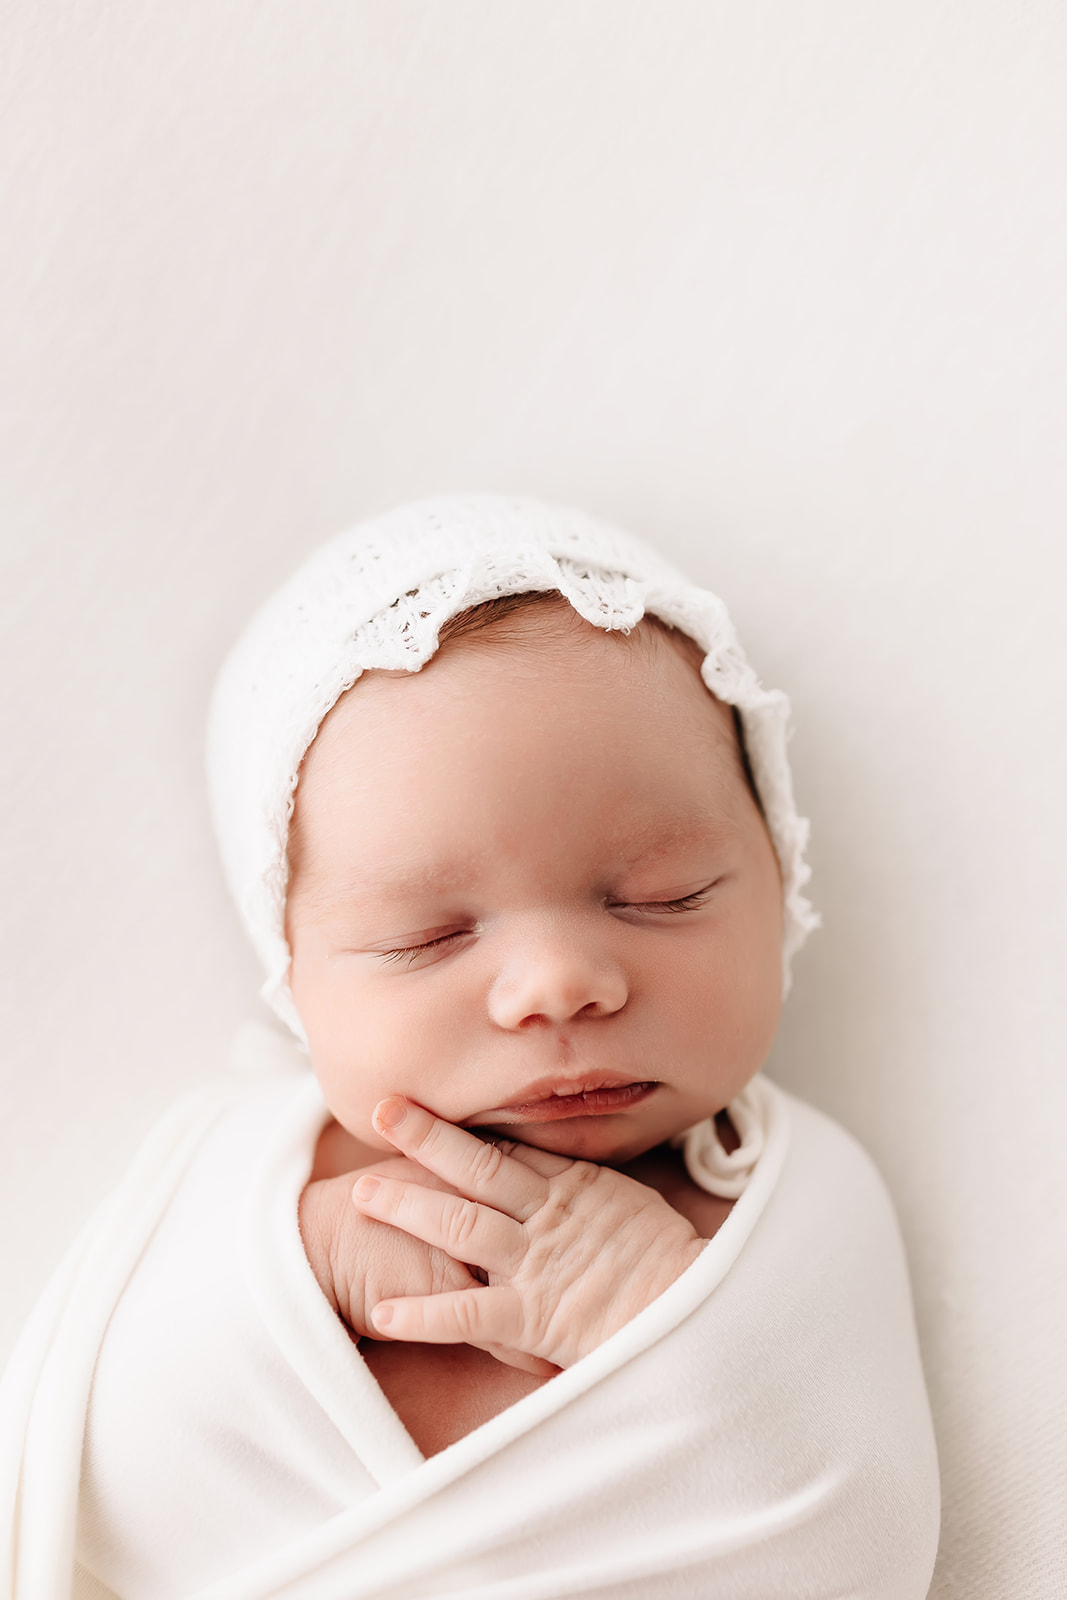 A newborn baby sleeps in a white swaddle and lace bonnet in a studio Washington University OBGYN